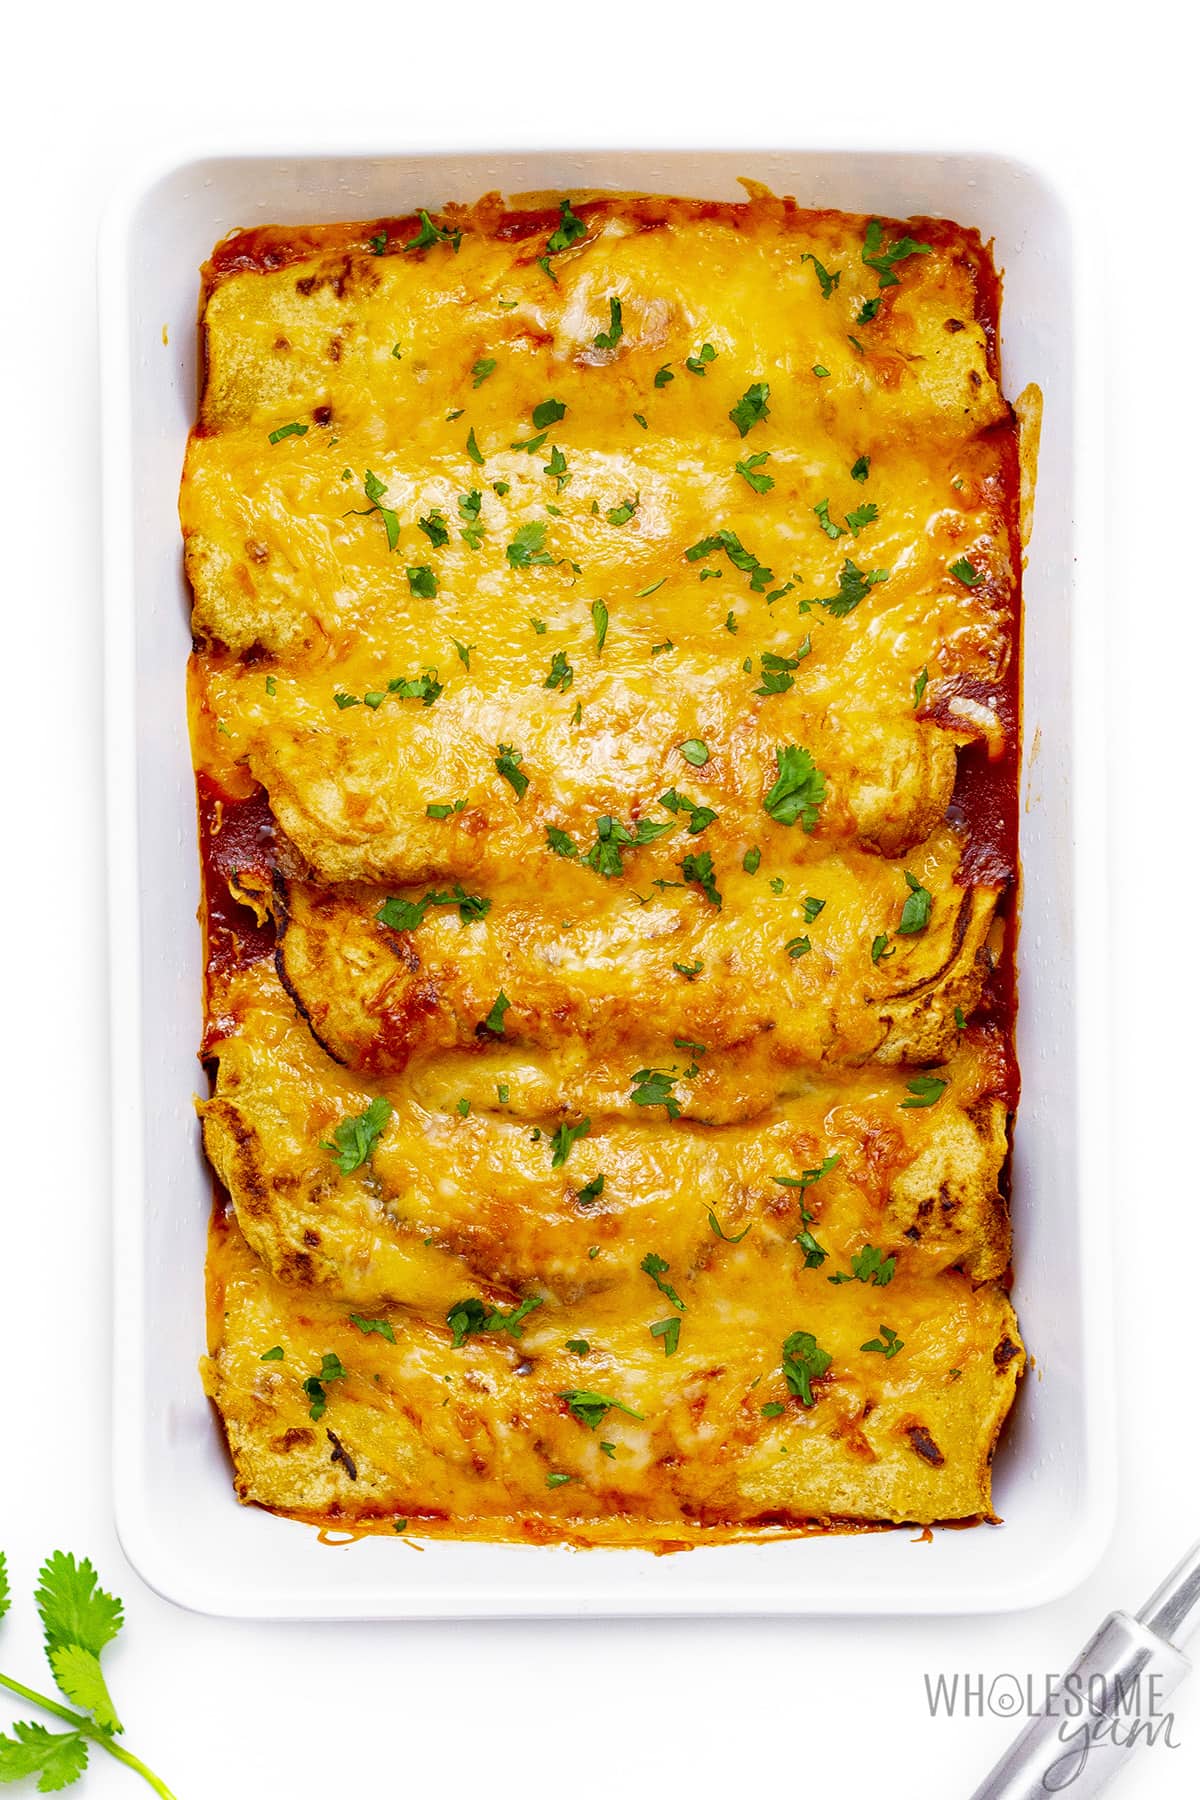 Baked low-carb chicken enchiladas in a griddle.